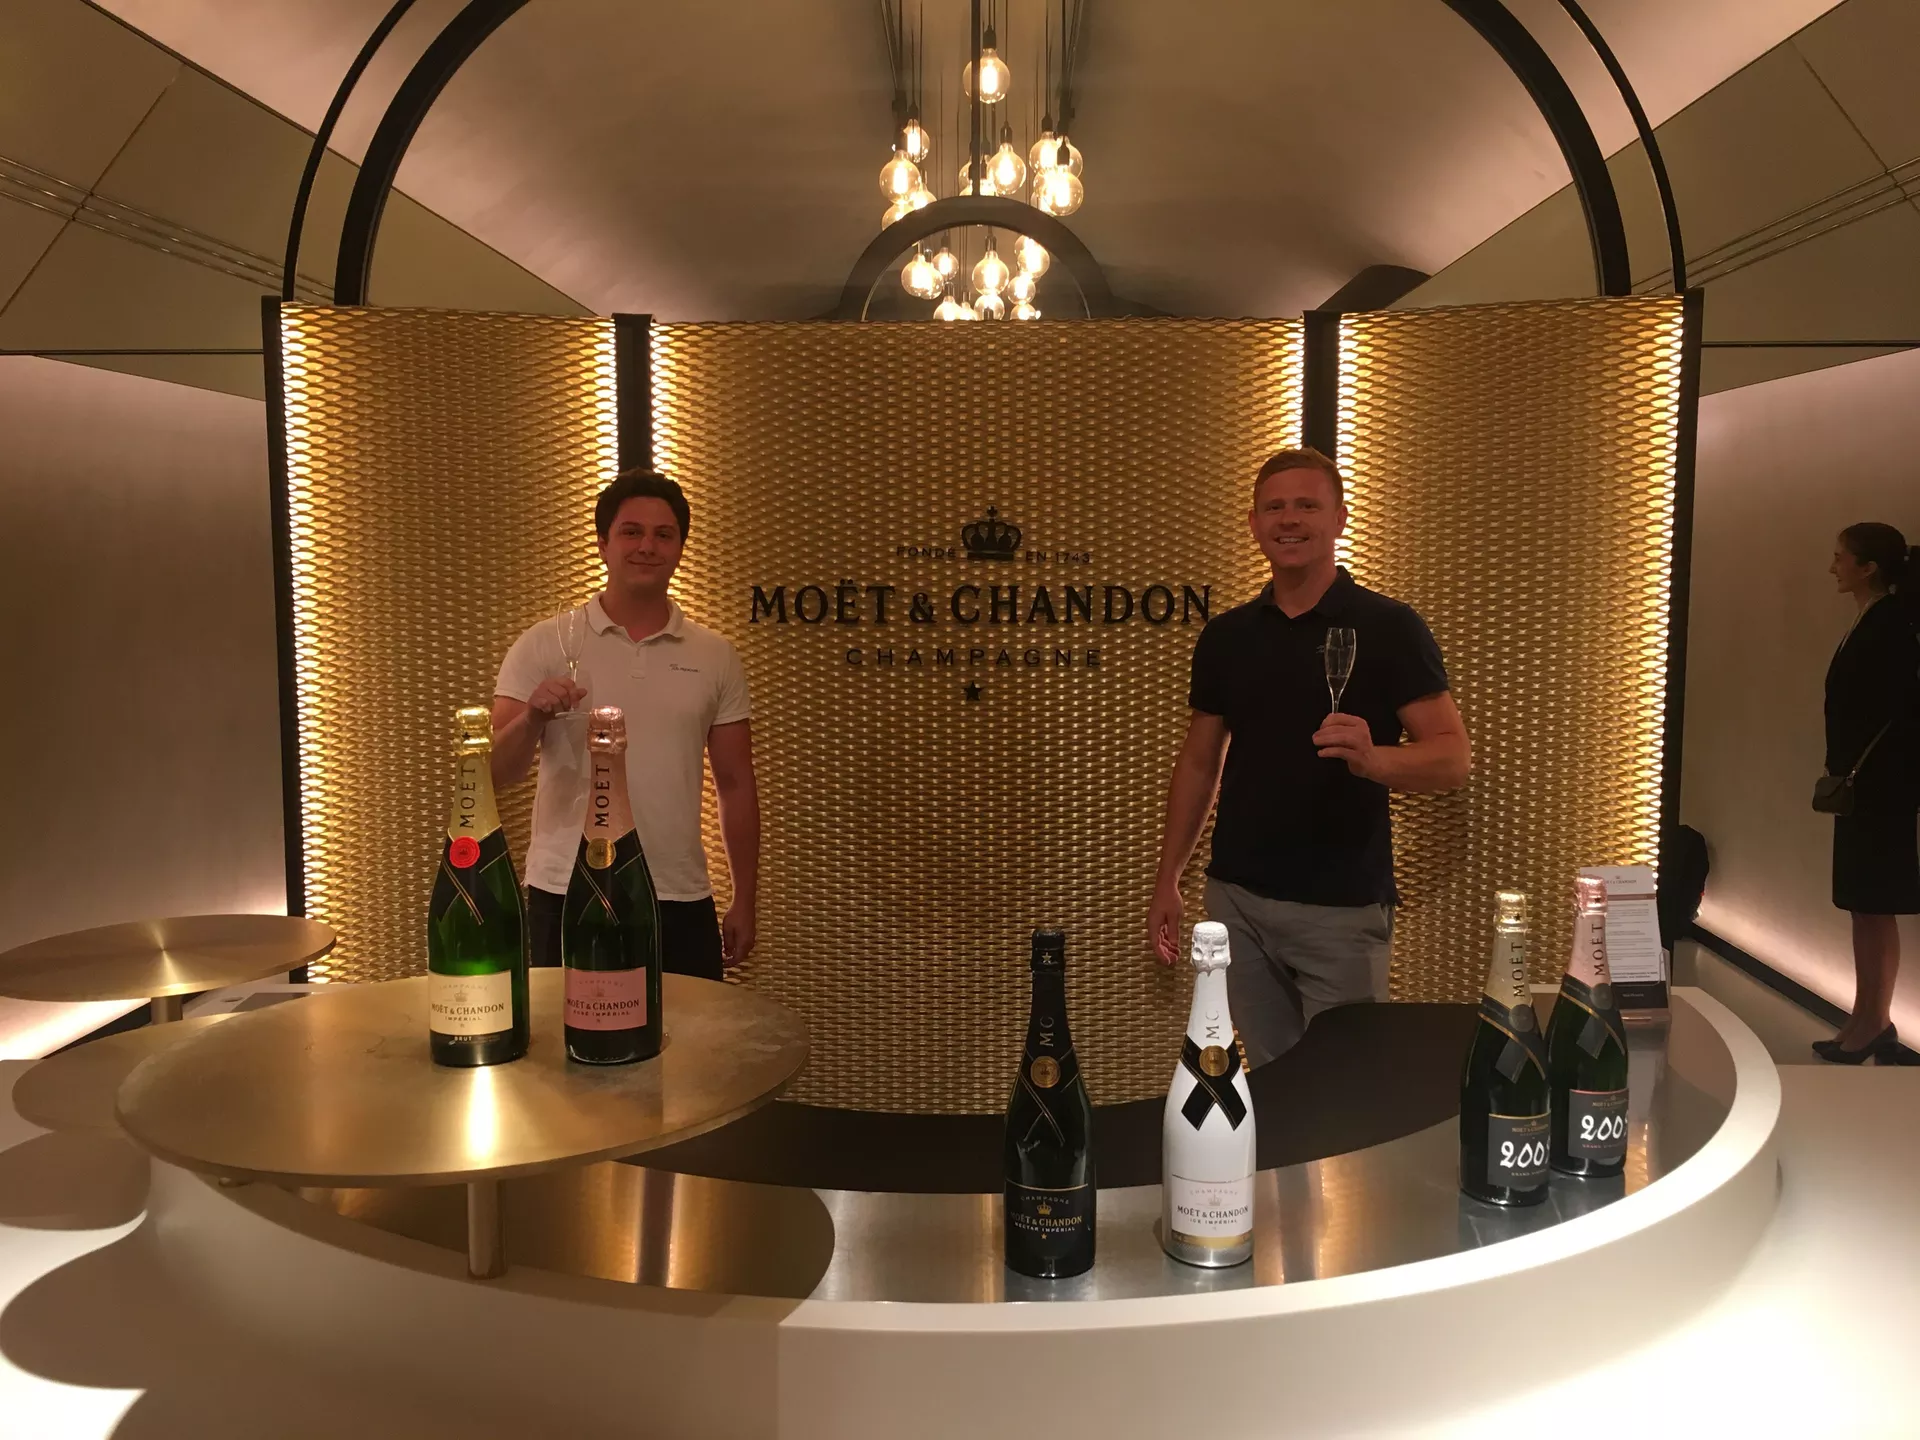 A Visit to Moet & Chandon Champagne in France